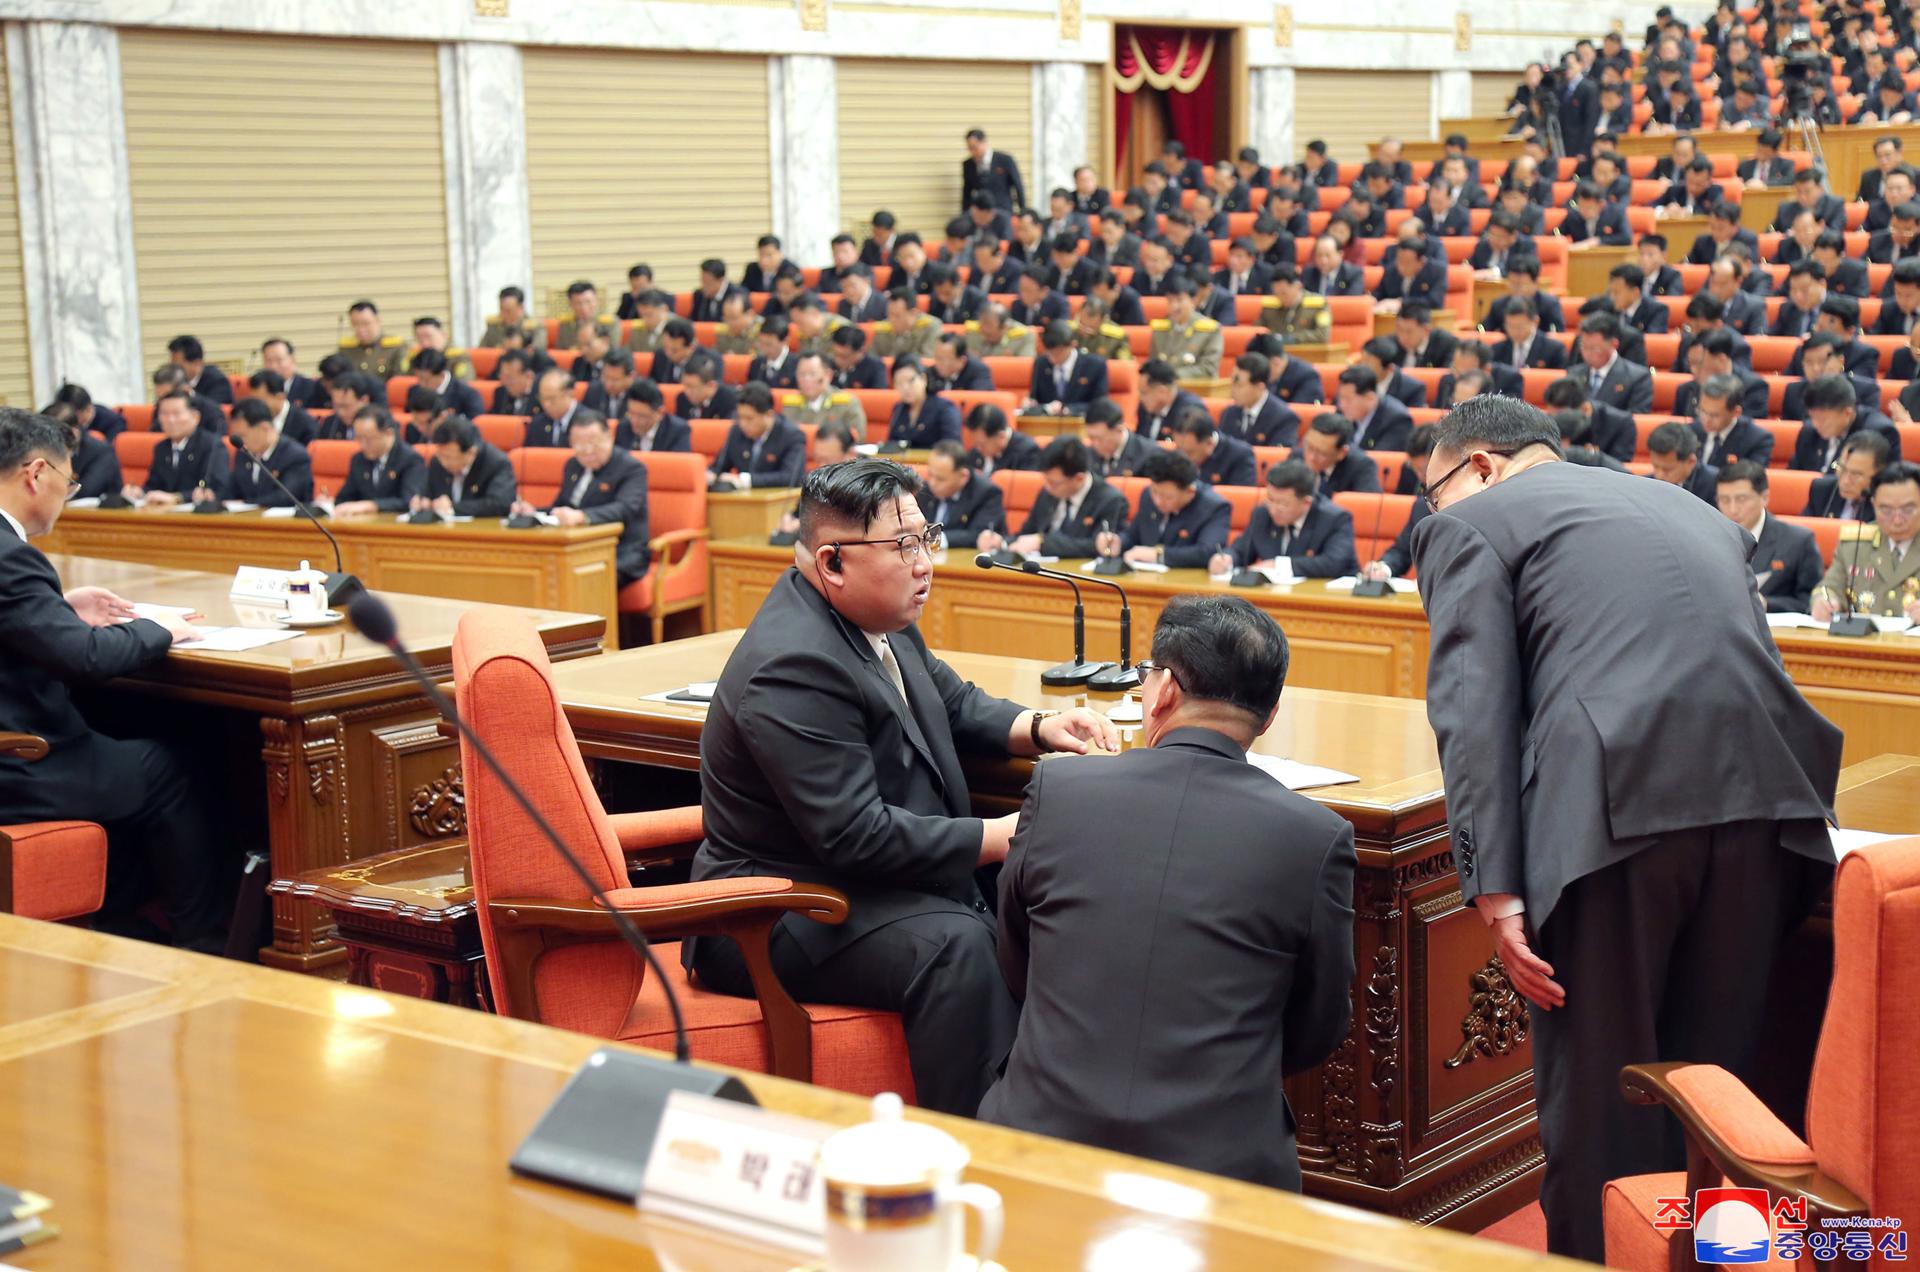 A photo released by the official North Korean Central News Agency (KCNA) shows North Korean Supreme Leader Kim Jong-un (C) presiding over the 7th enlarged plenary meeting of the 8th Central Committee of the Workers' Party of Korea (WPK) at the office building of the WPK Central Committee in Pyongyang, North Korea, 26 February 2023 (issued 27 February 2023). EFE-EPA/KCNA EDITORIAL USE ONLY